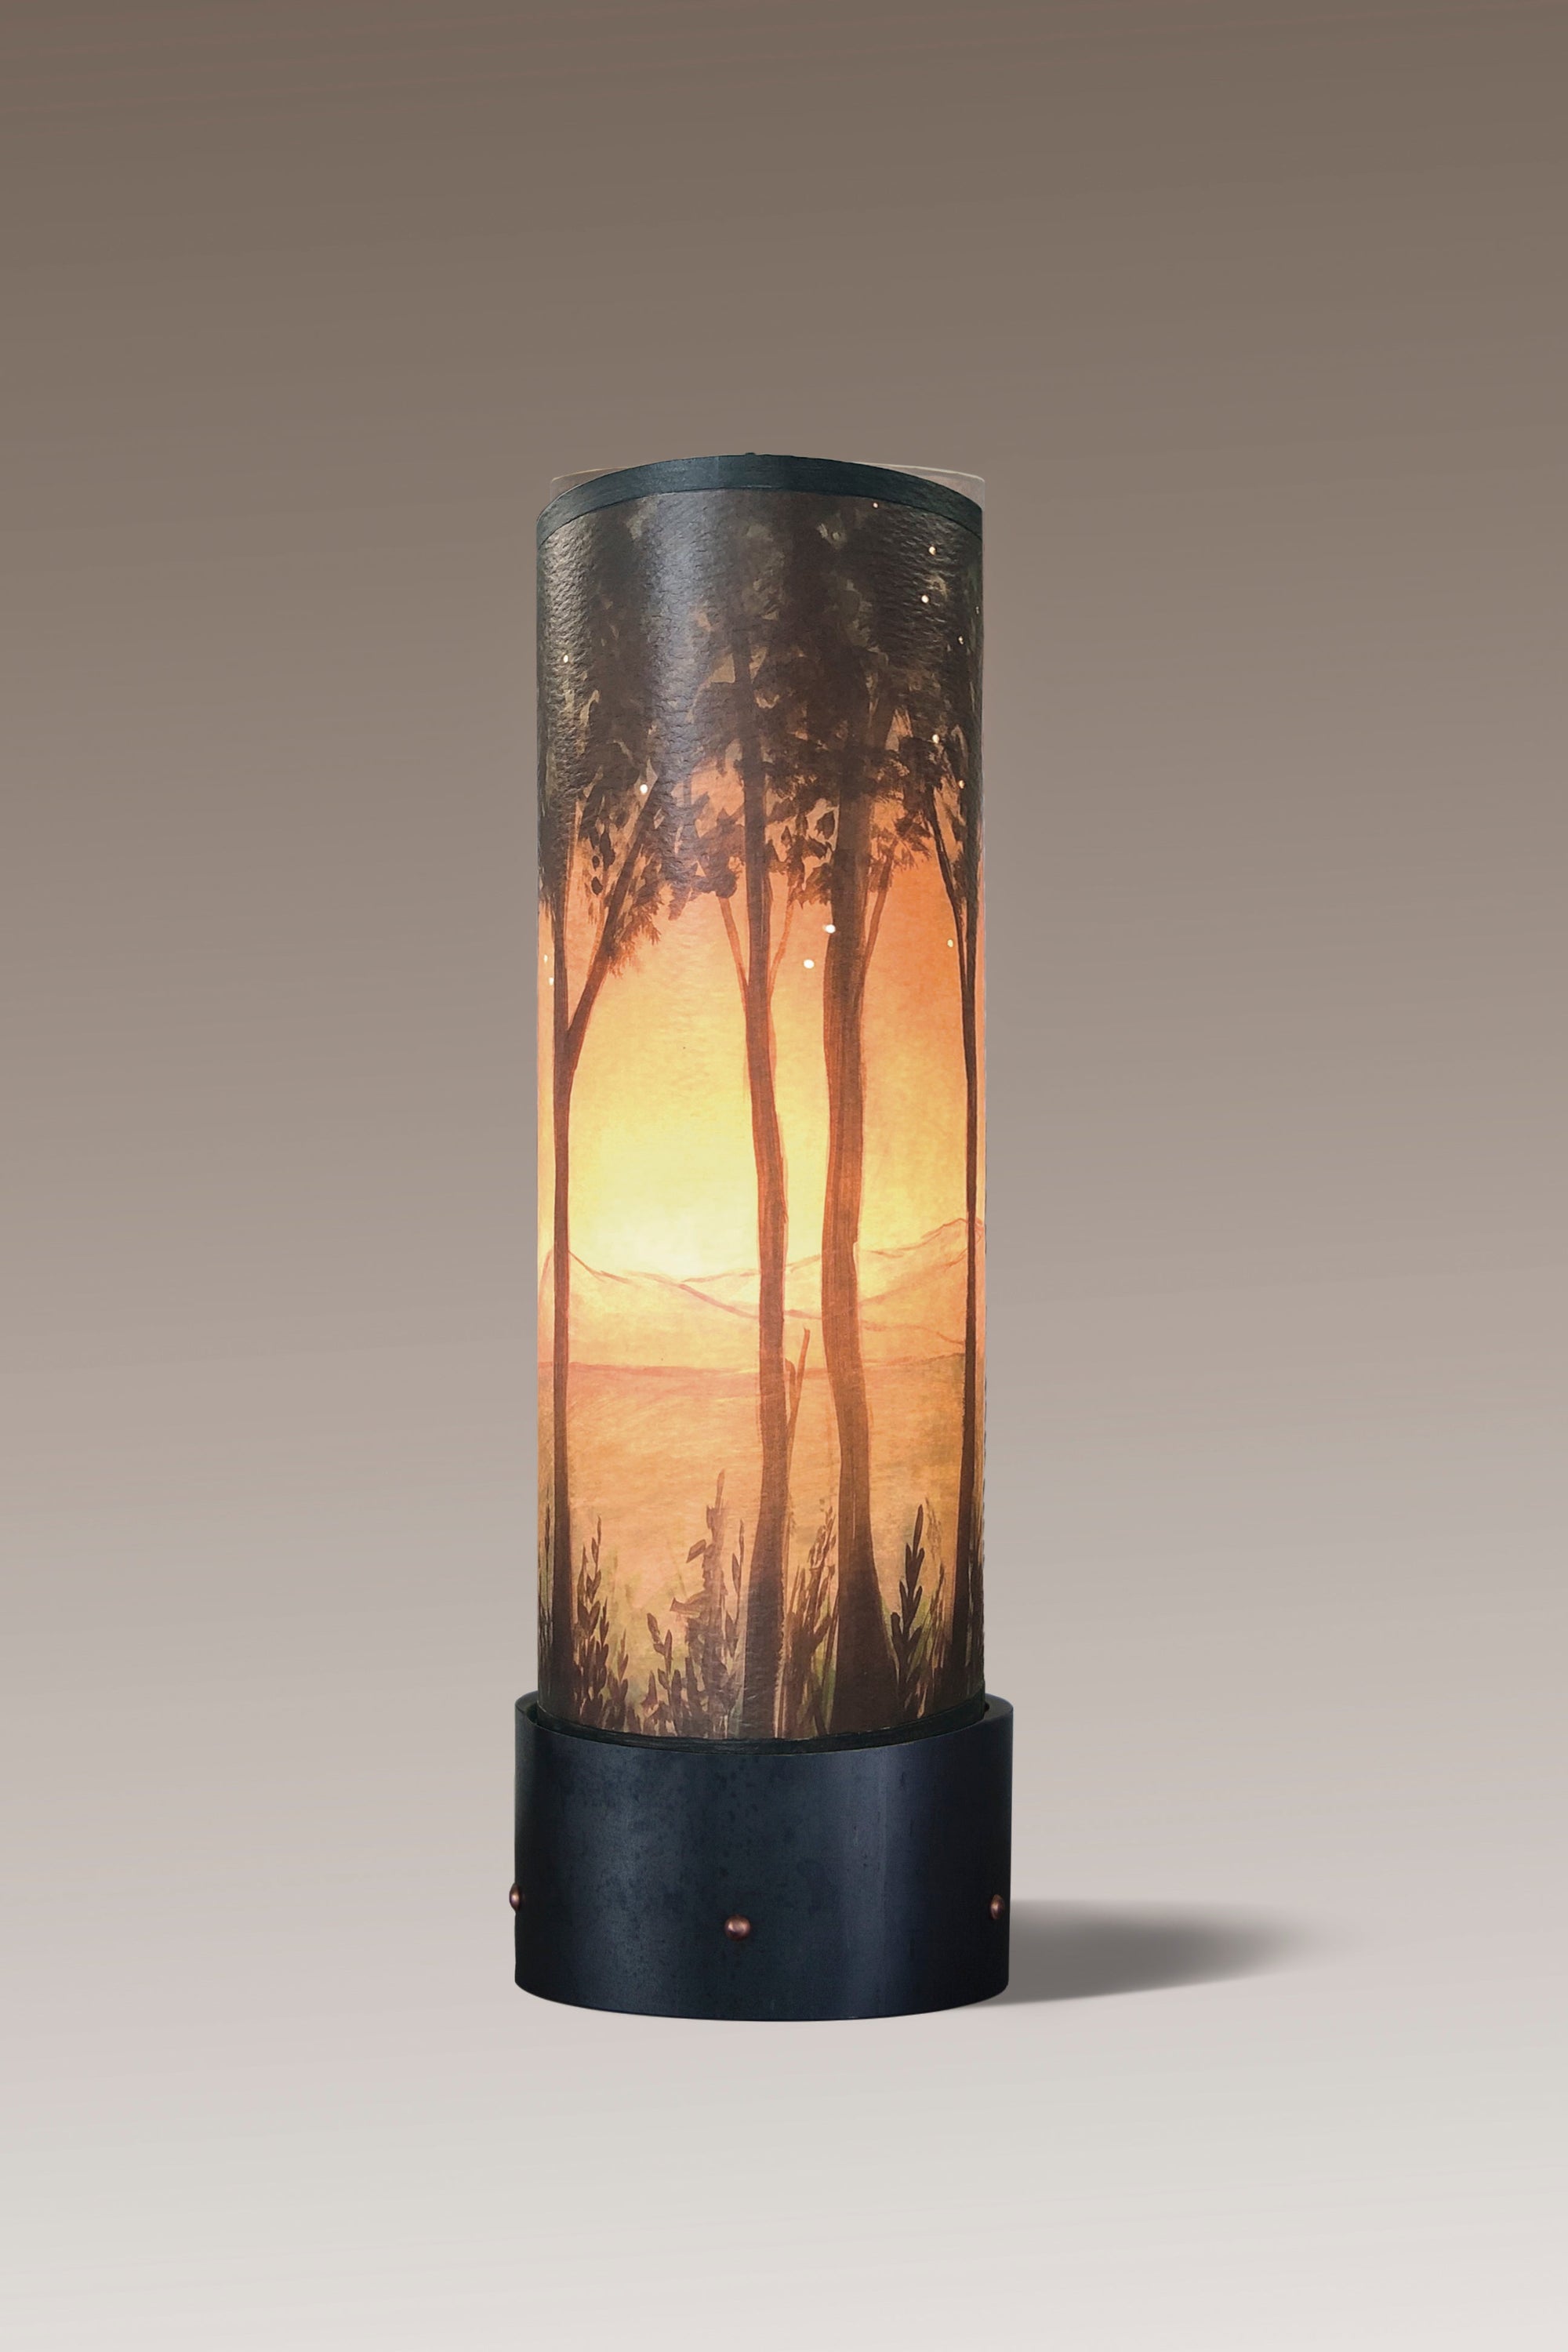 Janna Ugone & Co Luminaires Steel Luminaire Accent Lamp with Dawn Shade